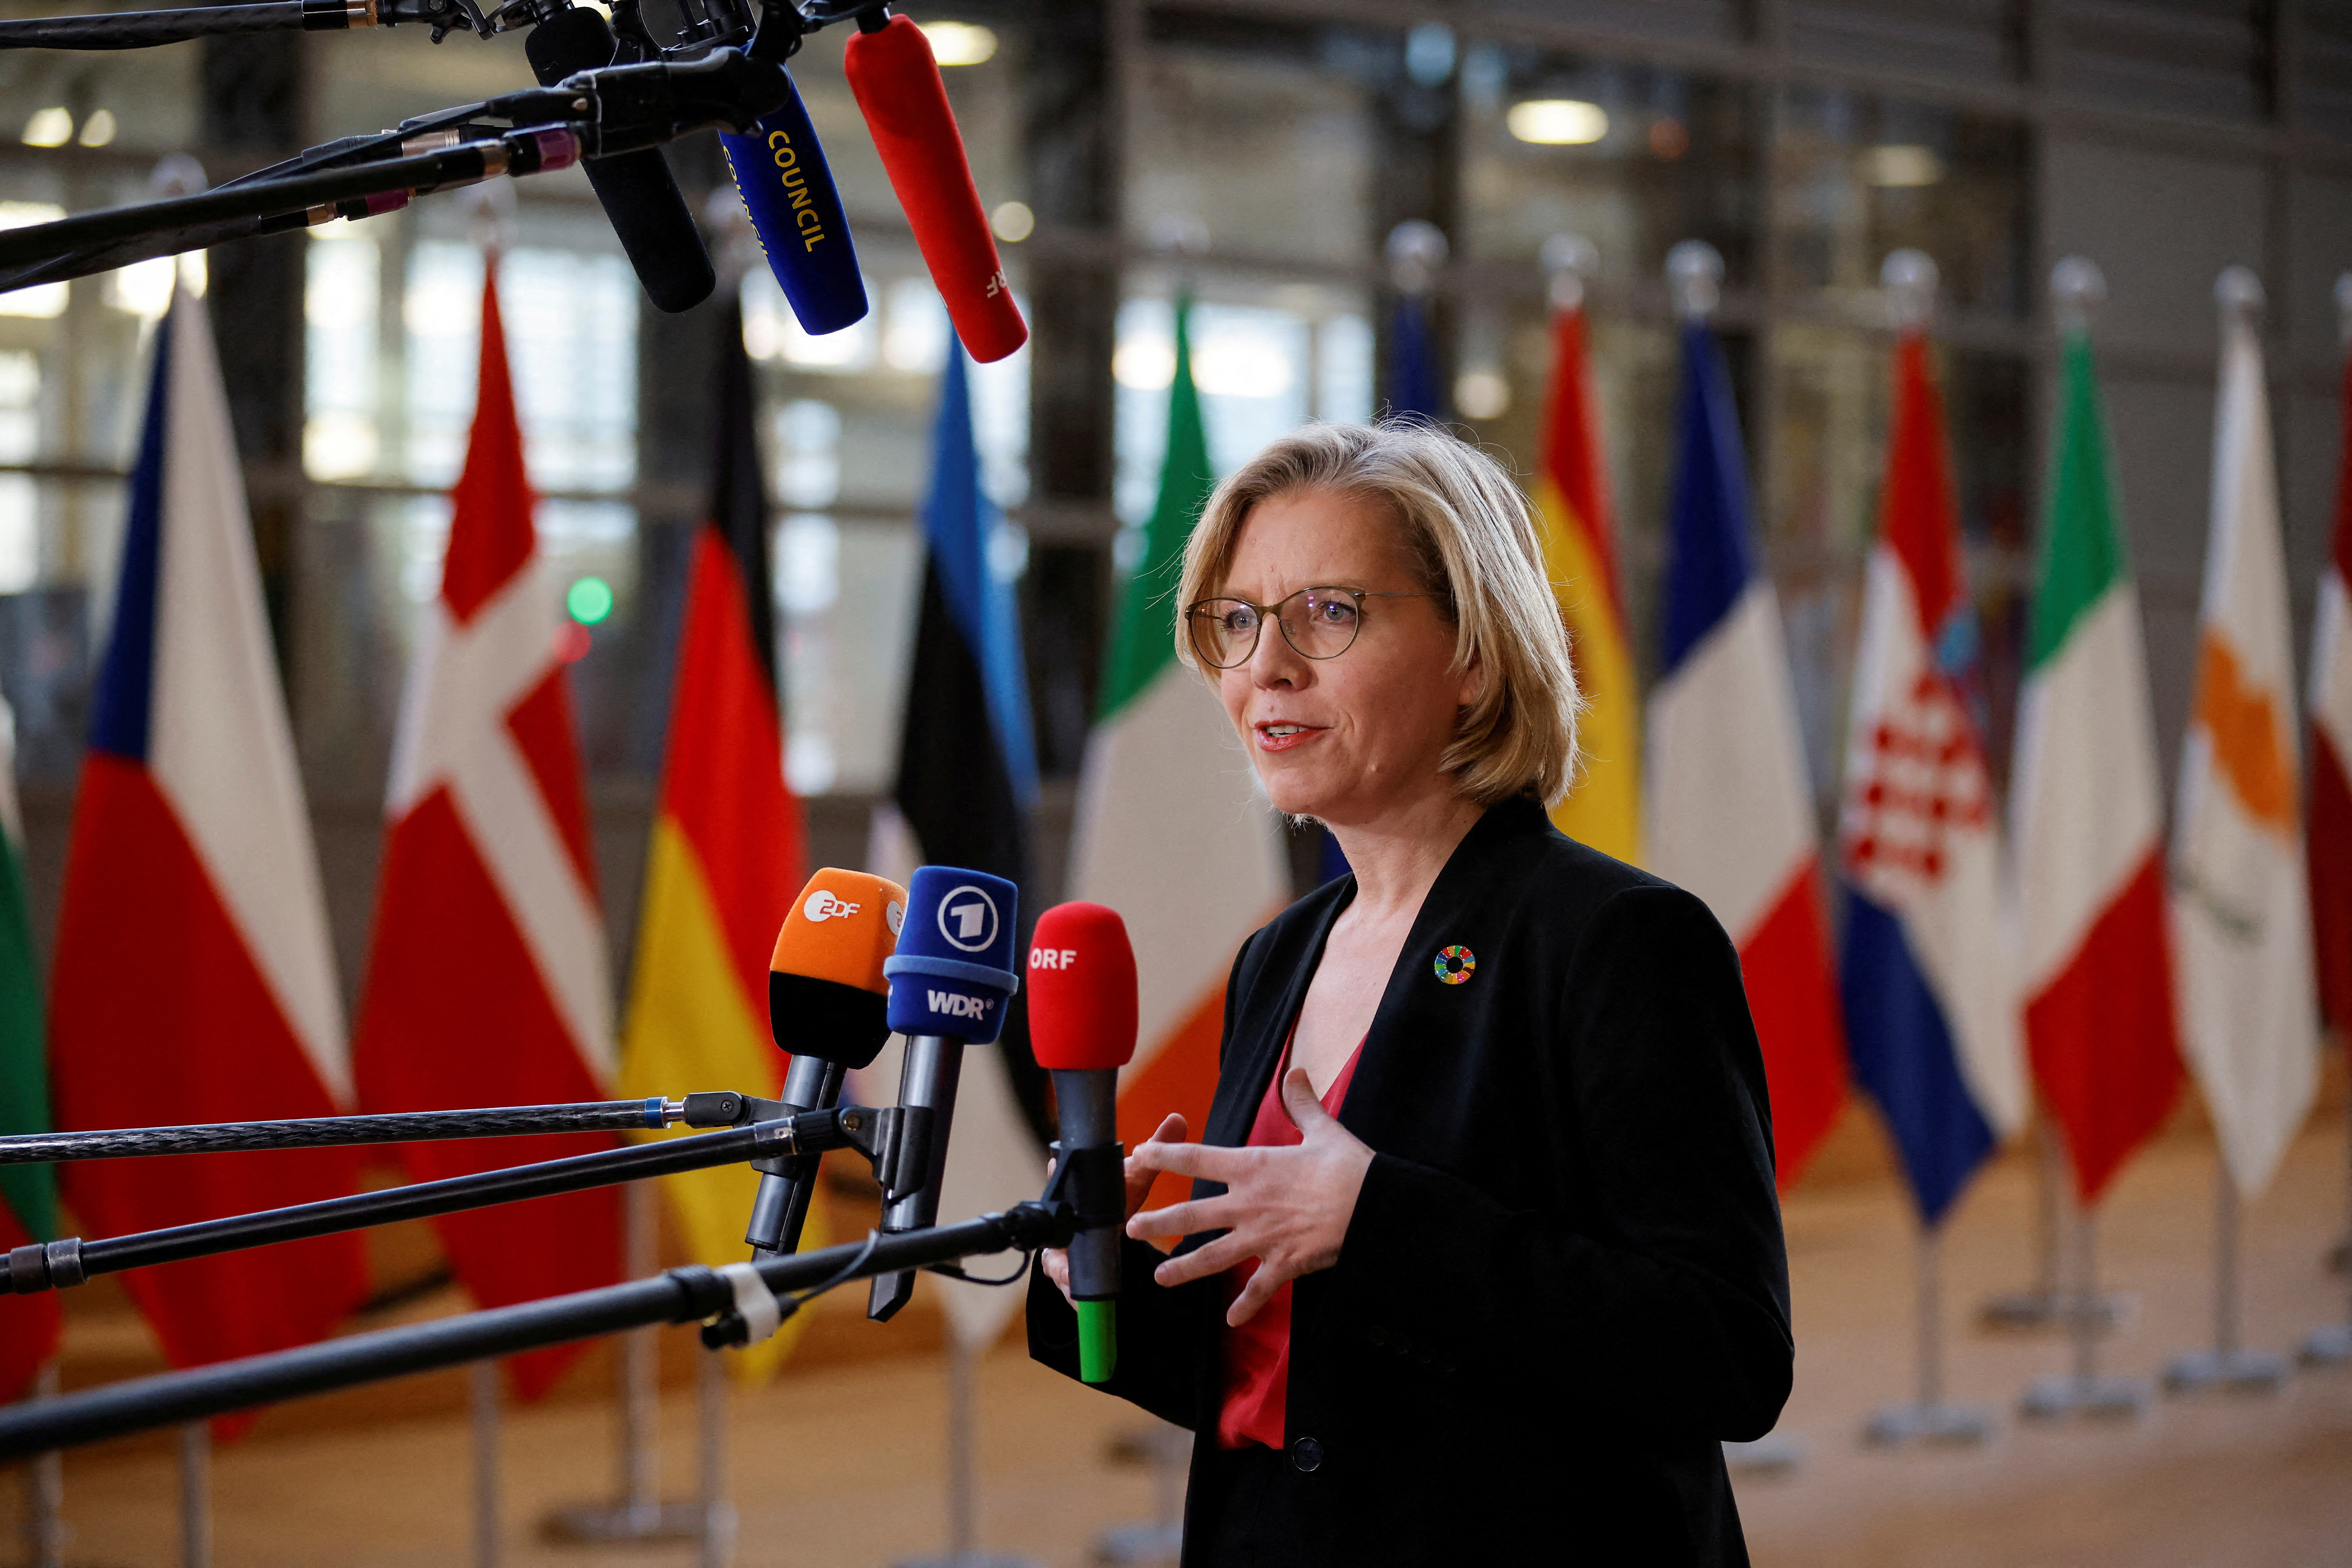 Austria's Leonore Gewessler attends EU energy ministers' meeting in Brussels